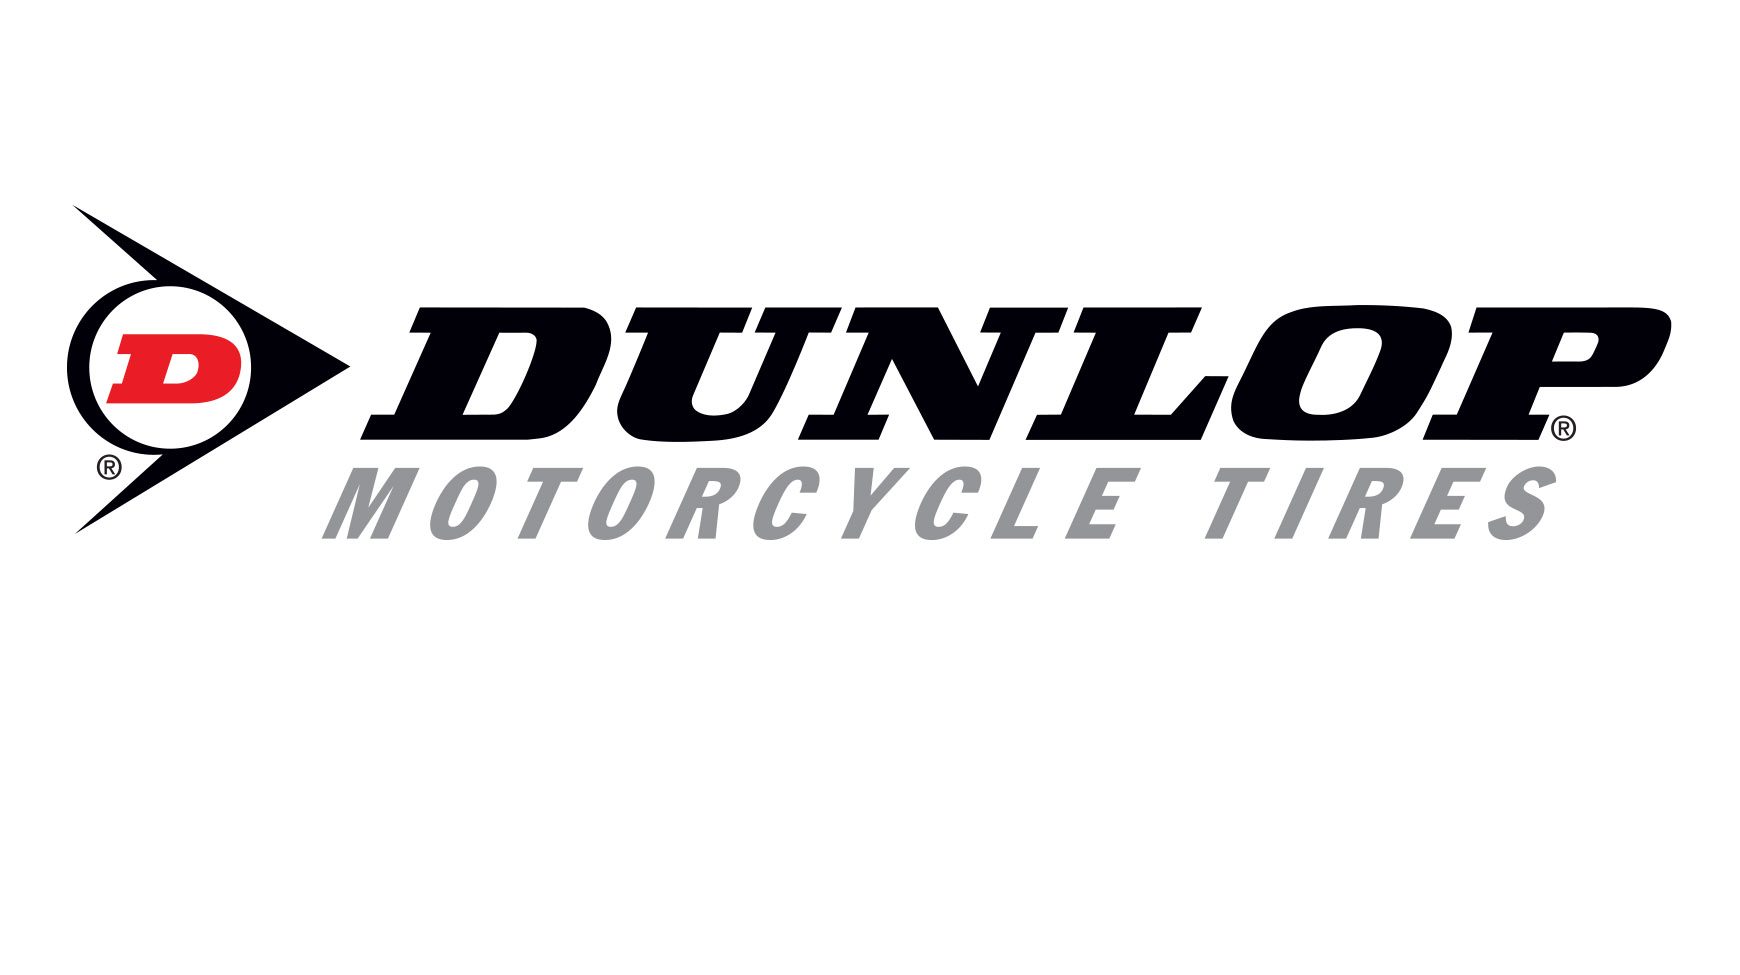 Contact - MotorcycleRaceTires | Dunlop Motorcycle Tires